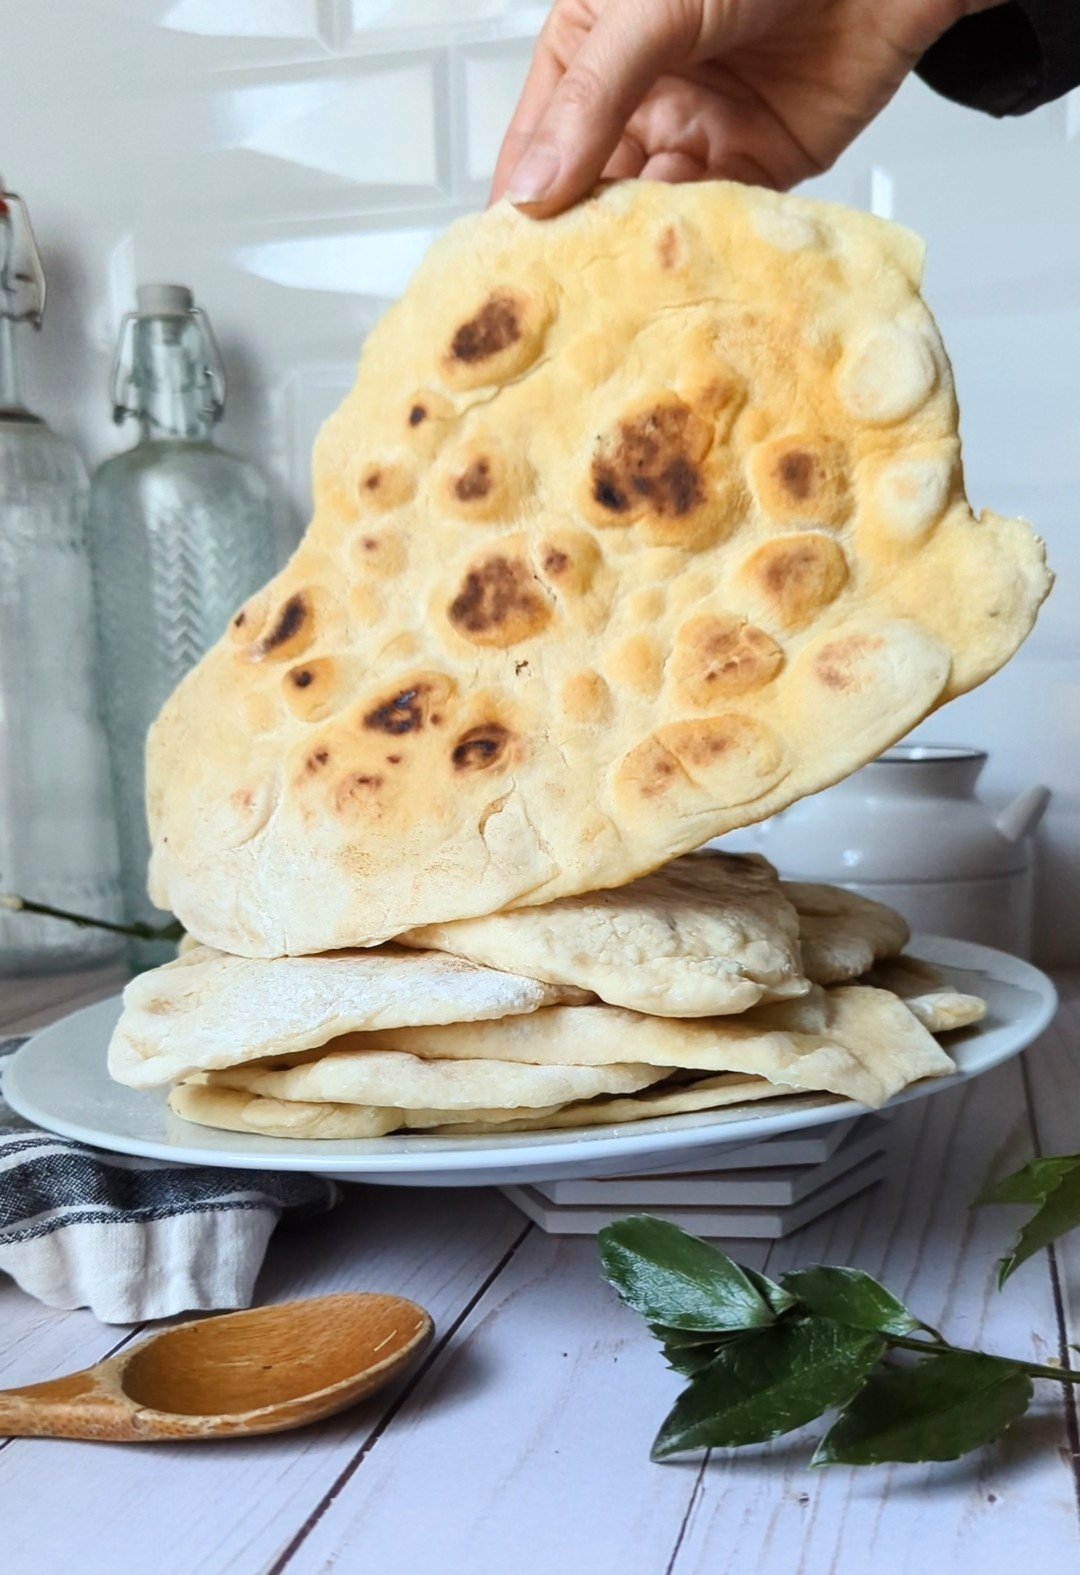 yeast naan recipe egg free dairy free flatbread recipe at home indian naan